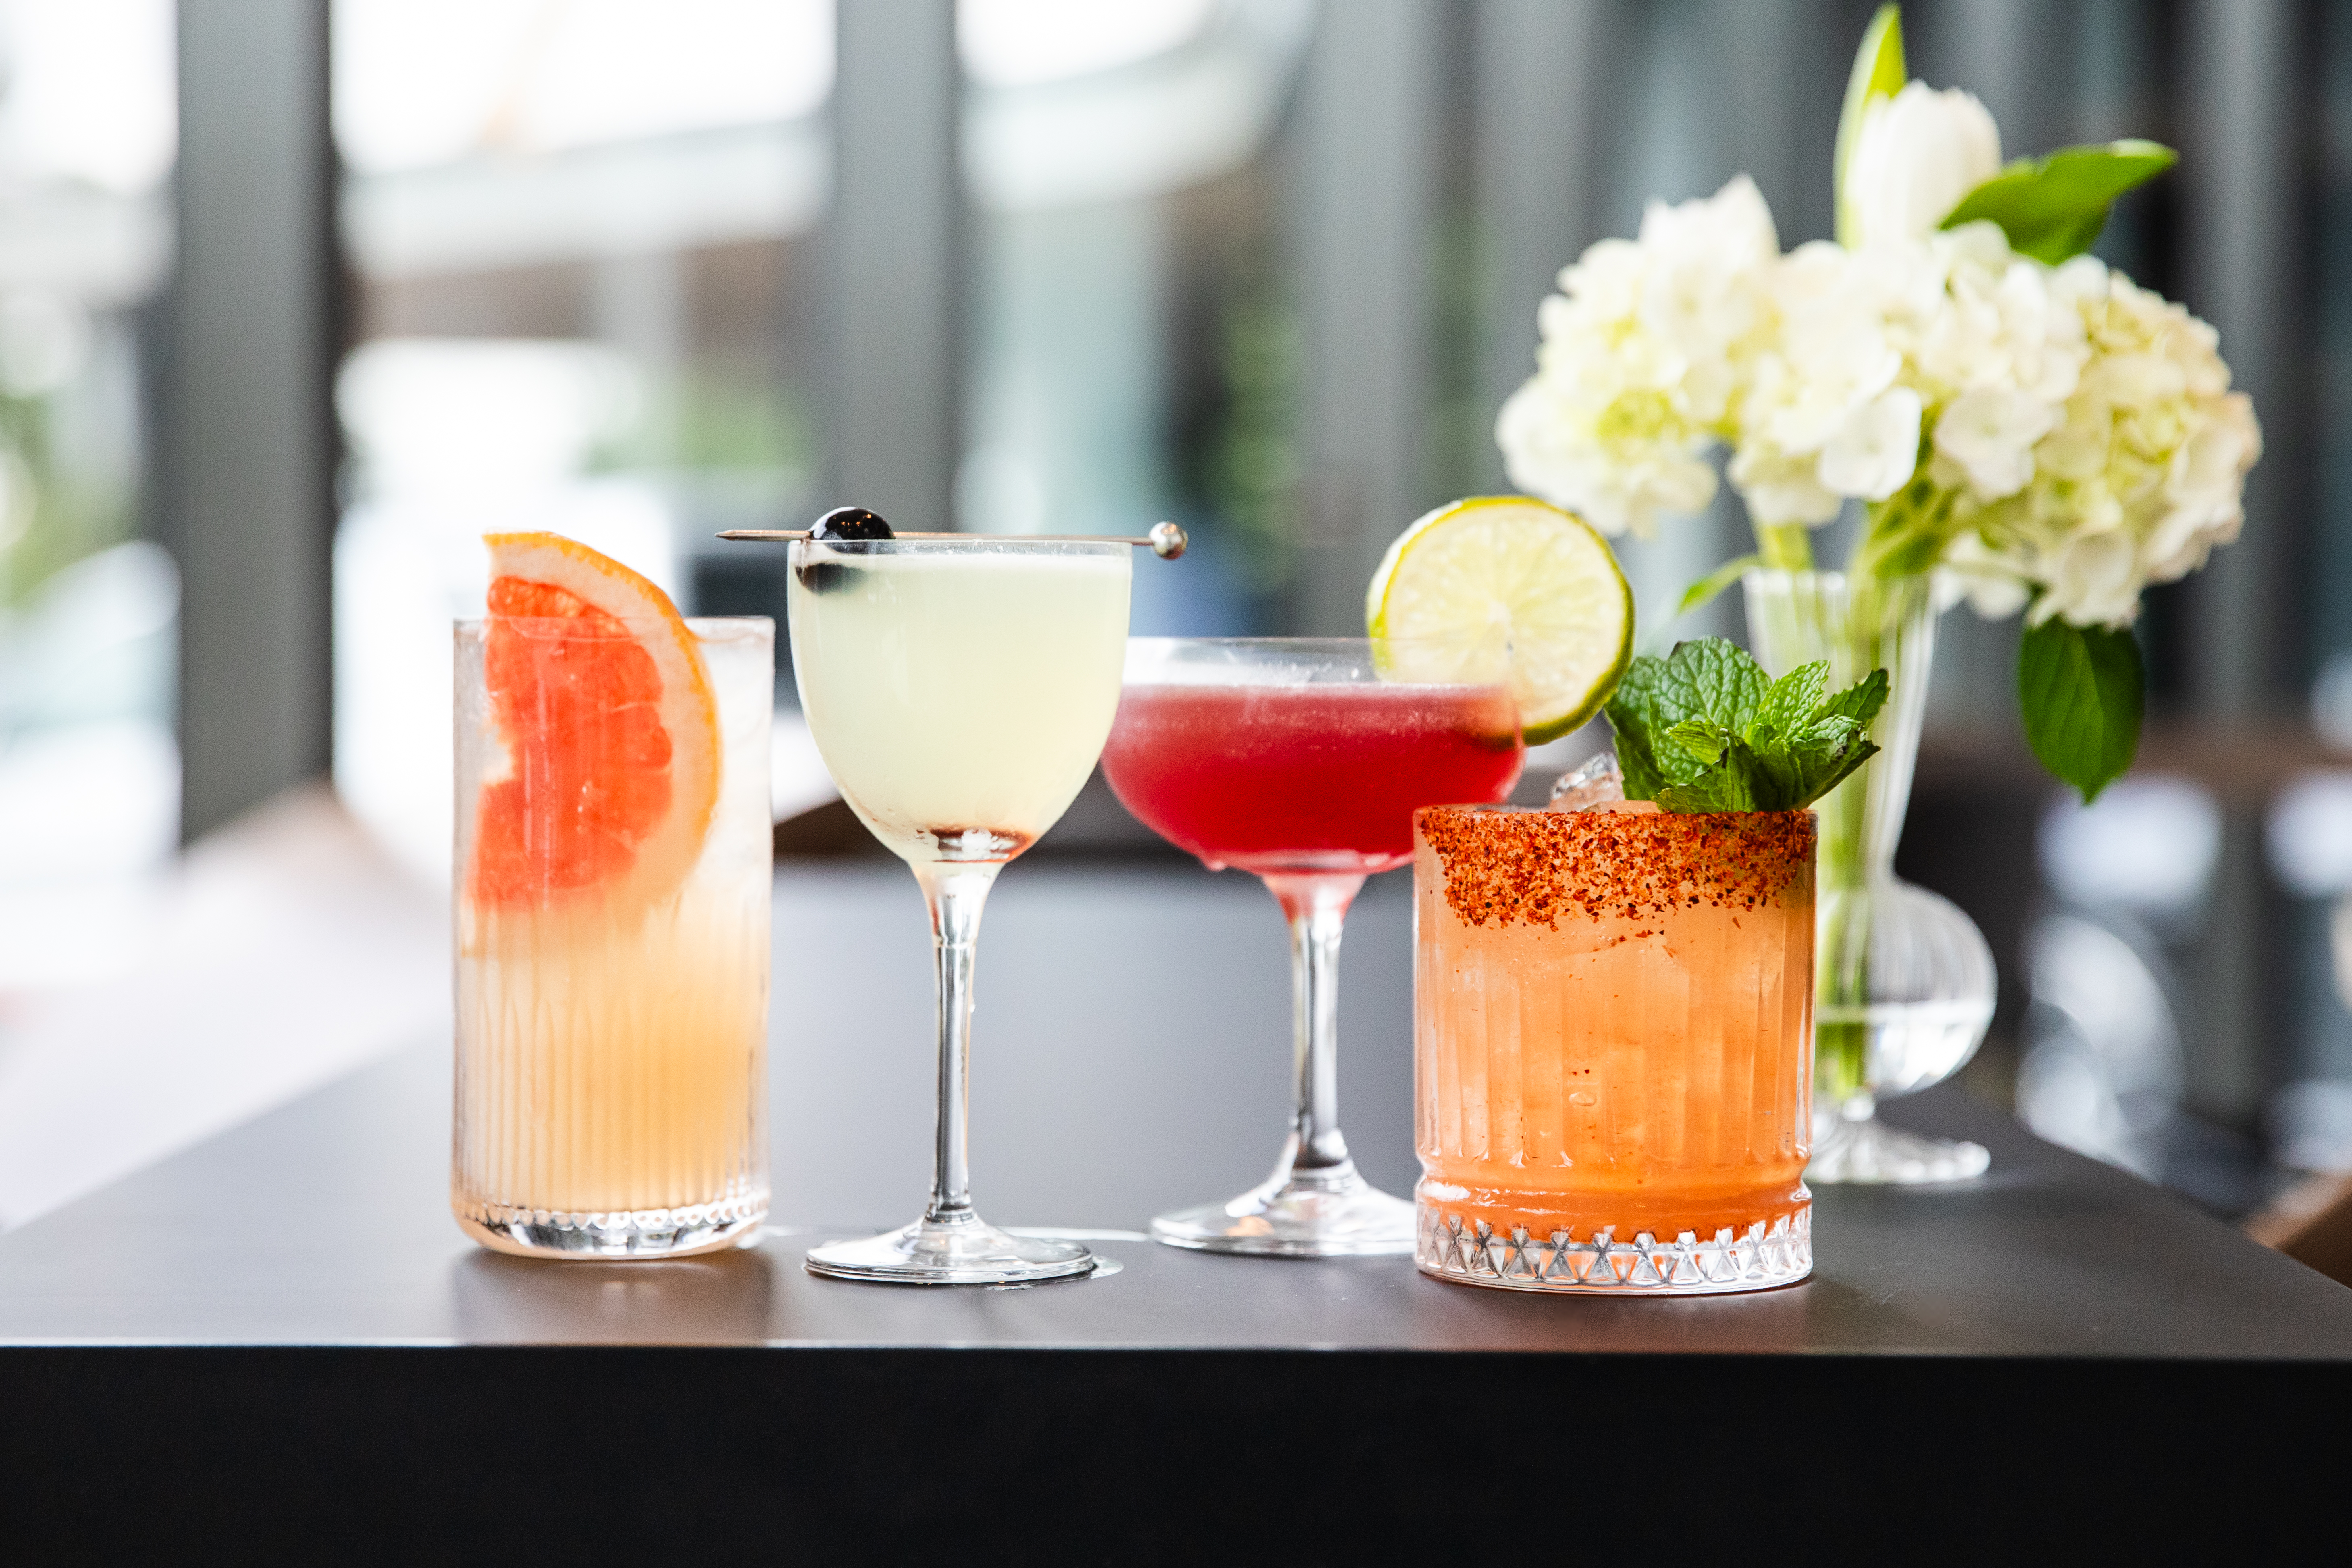 An image of four cocktails.